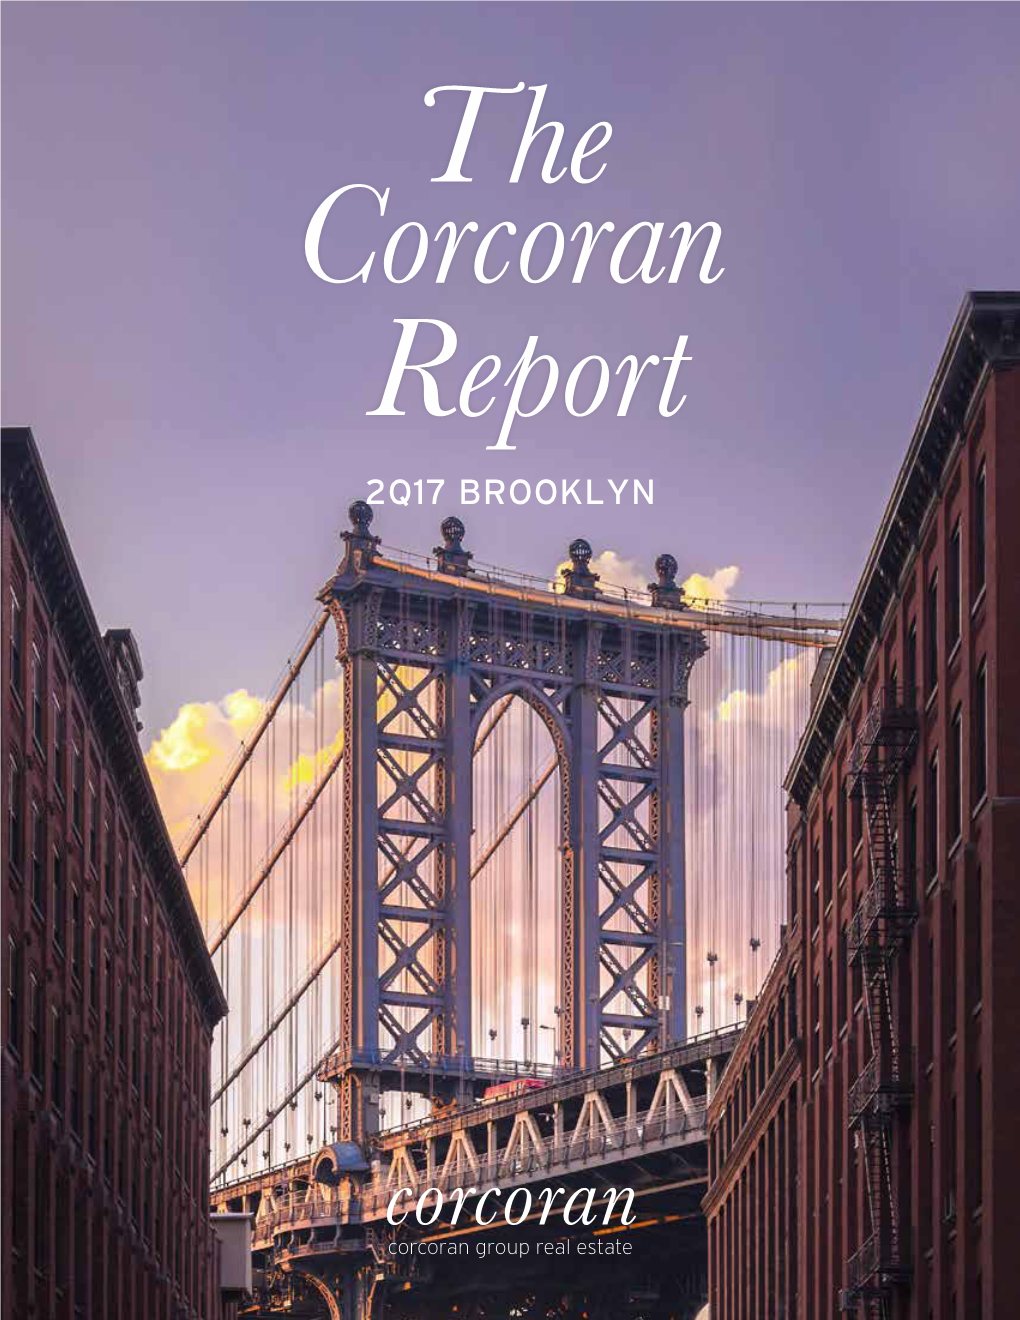 2Q17 BROOKLYN Contentssecond Quarter 2017 3 Overview 3/7 Market Wide 4 Sales 5 Inventory 6 Prices 7 Market Share